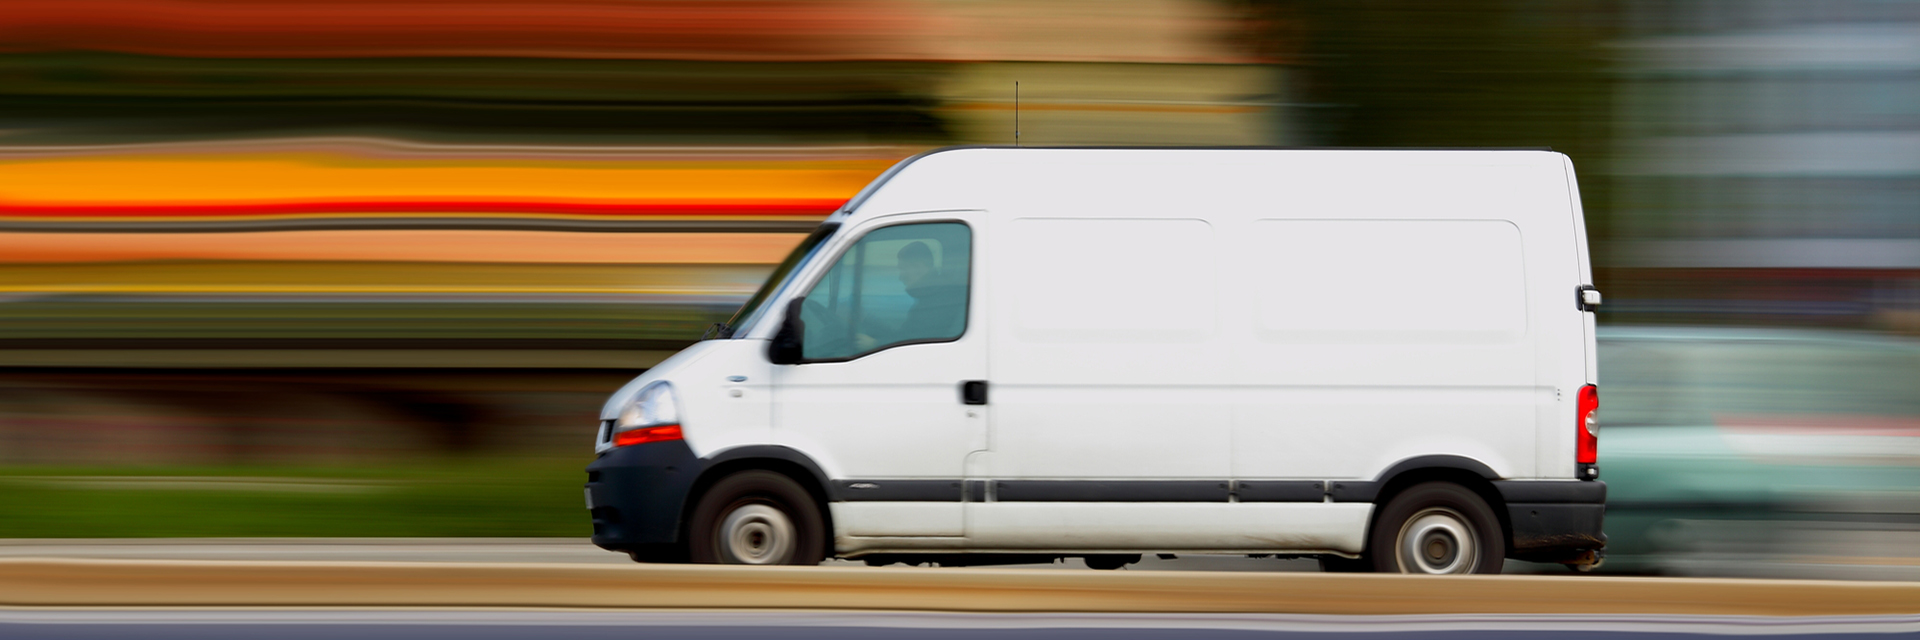 White van driving down the road with blurred background